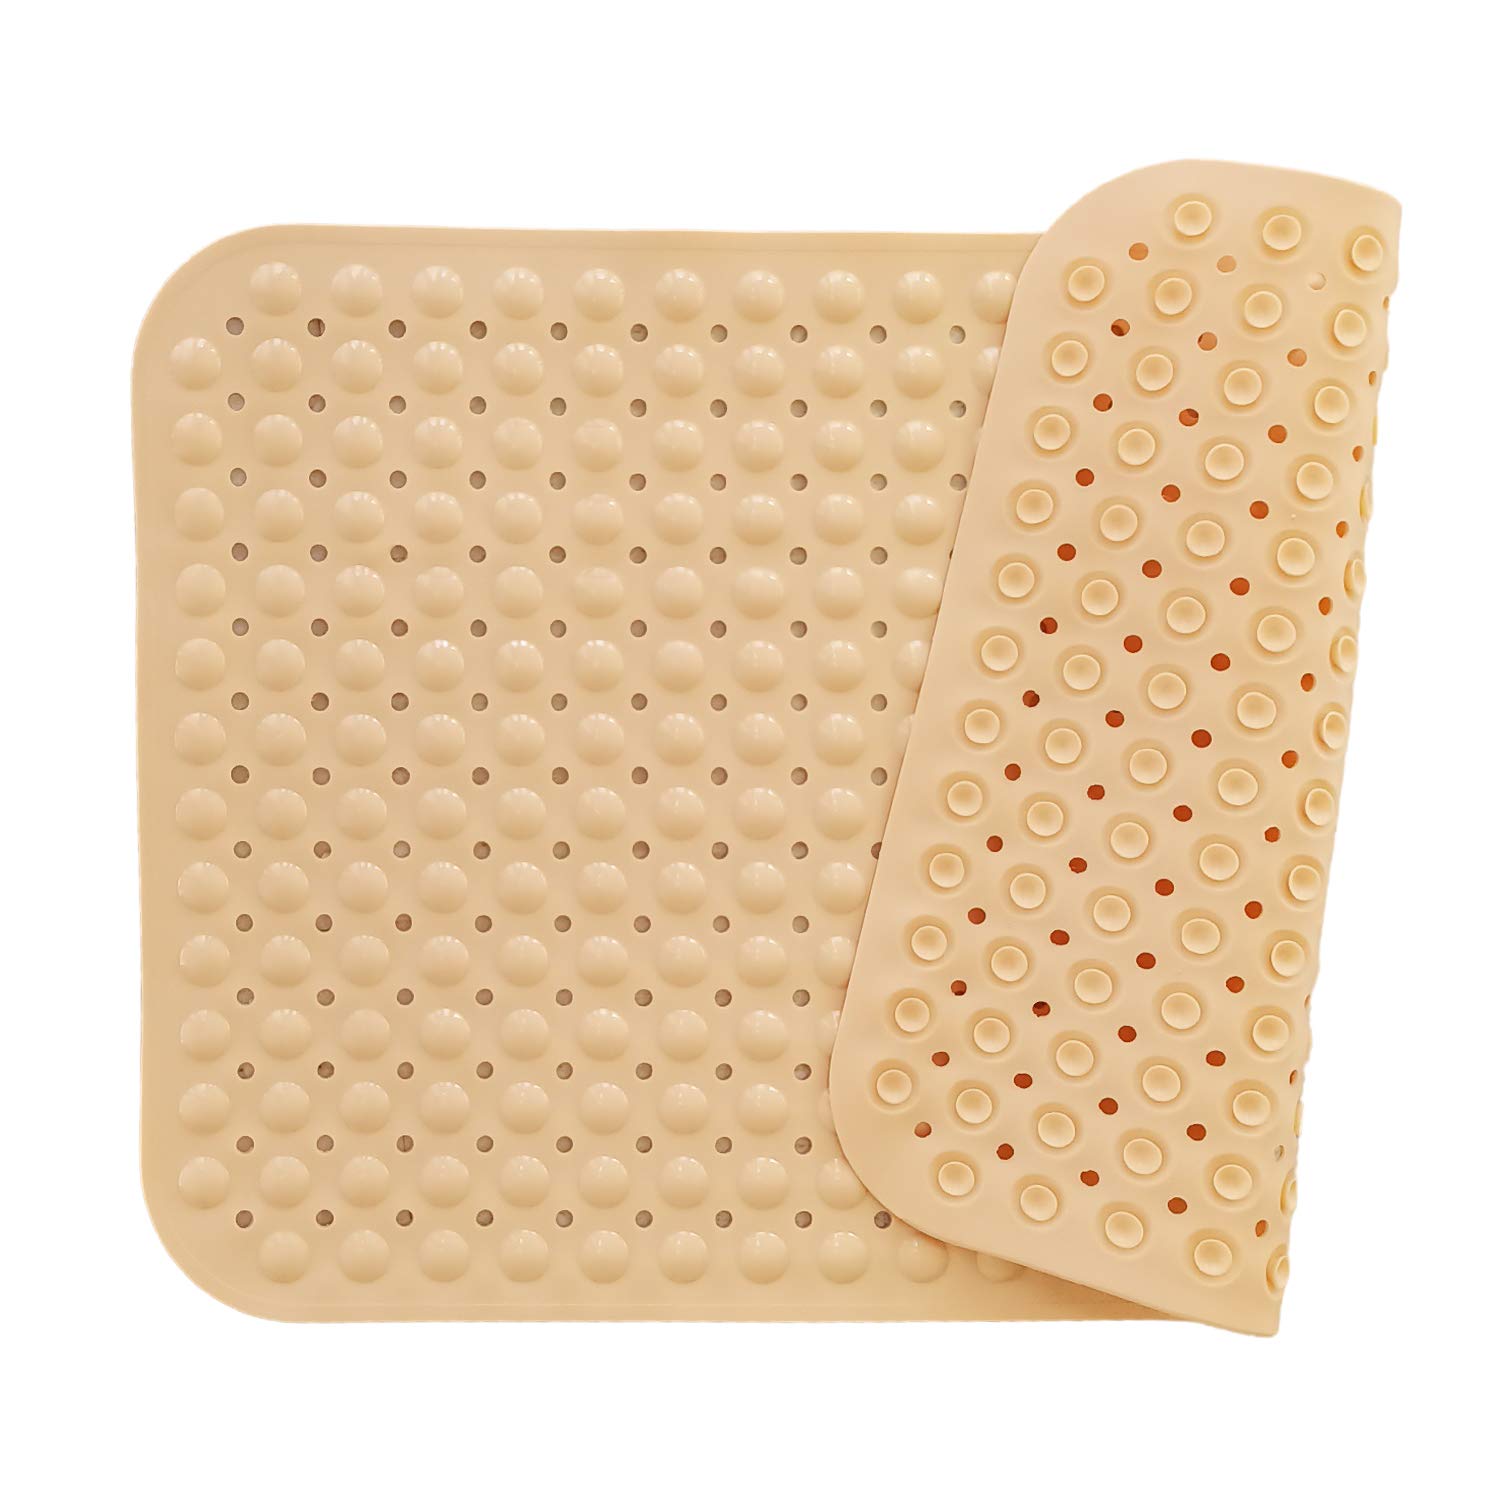 Experia Anti-Slip bath mat with Suction Cup 88x58cm(Cream Color with Soft-Pebble) LifeKrafts